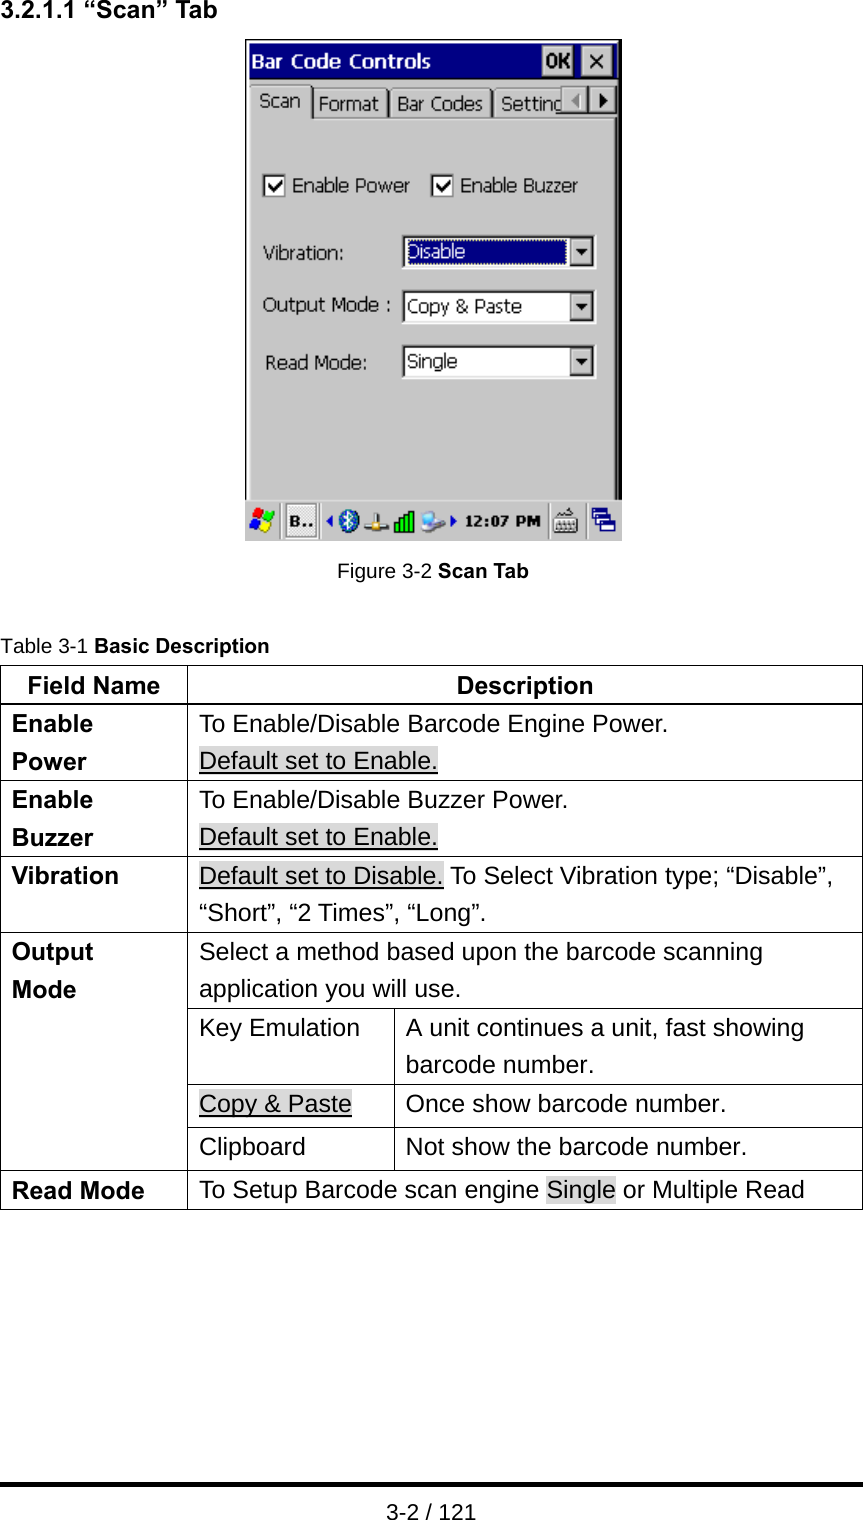  3-2 / 121 3.2.1.1 “Scan” Tab  Figure 3-2 Scan Tab  Table 3-1 Basic Description Field Name  Description Enable Power To Enable/Disable Barcode Engine Power. Default set to Enable. Enable Buzzer To Enable/Disable Buzzer Power.   Default set to Enable. Vibration  Default set to Disable. To Select Vibration type; “Disable”, “Short”, “2 Times”, “Long”.   Select a method based upon the barcode scanning application you will use. Key Emulation  A unit continues a unit, fast showing barcode number. Copy &amp; Paste  Once show barcode number. Output  Mode  Clipboard  Not show the barcode number. Read Mode  To Setup Barcode scan engine Single or Multiple Read   